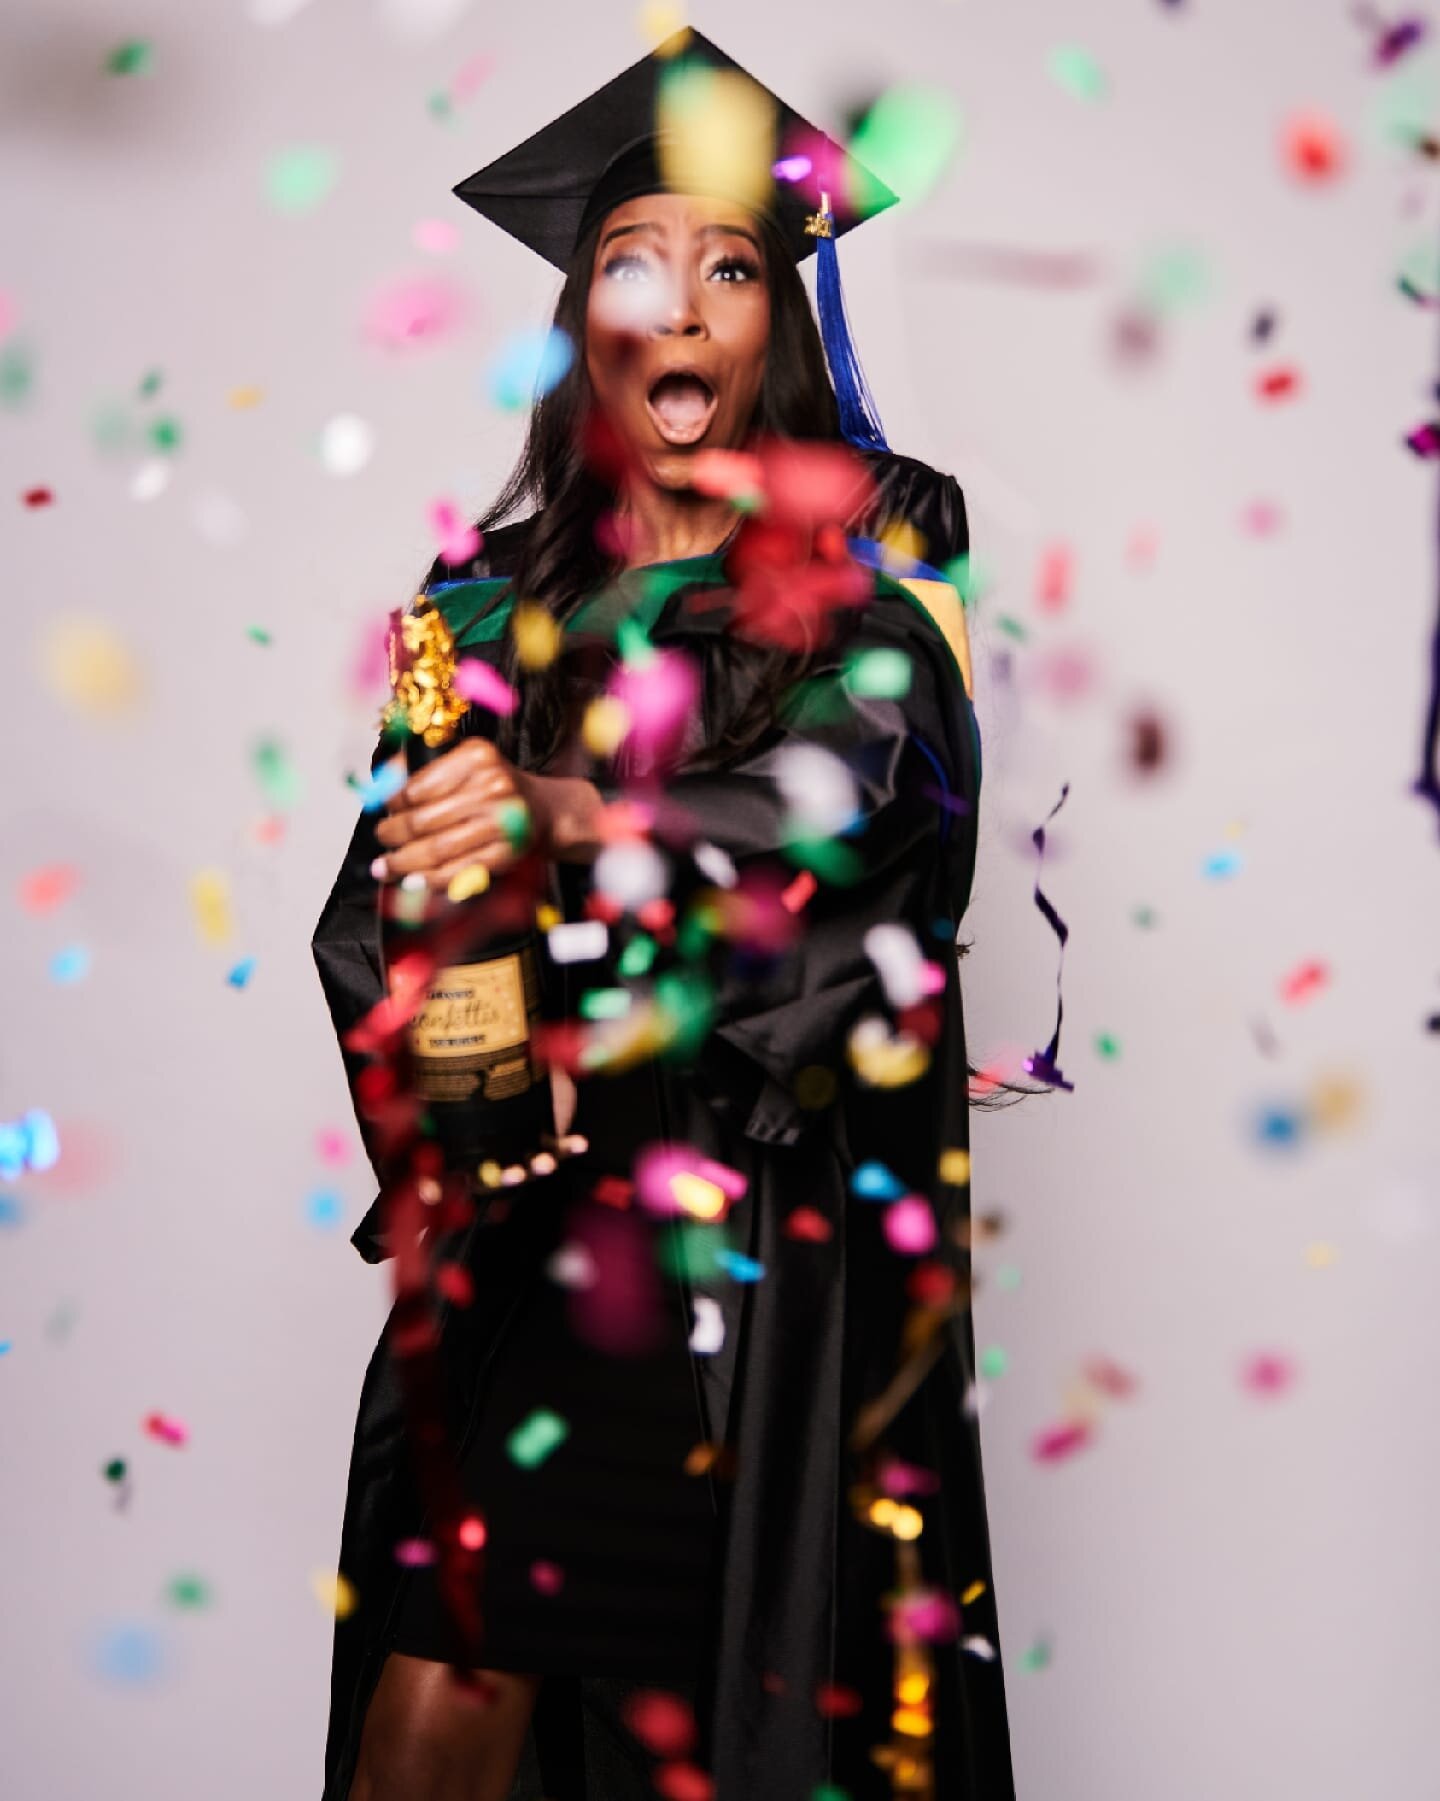 A fun (messy) graduation shoot 🤙🏾

Got ideas for an awesome shoot? Hit me up, let's plan it out!